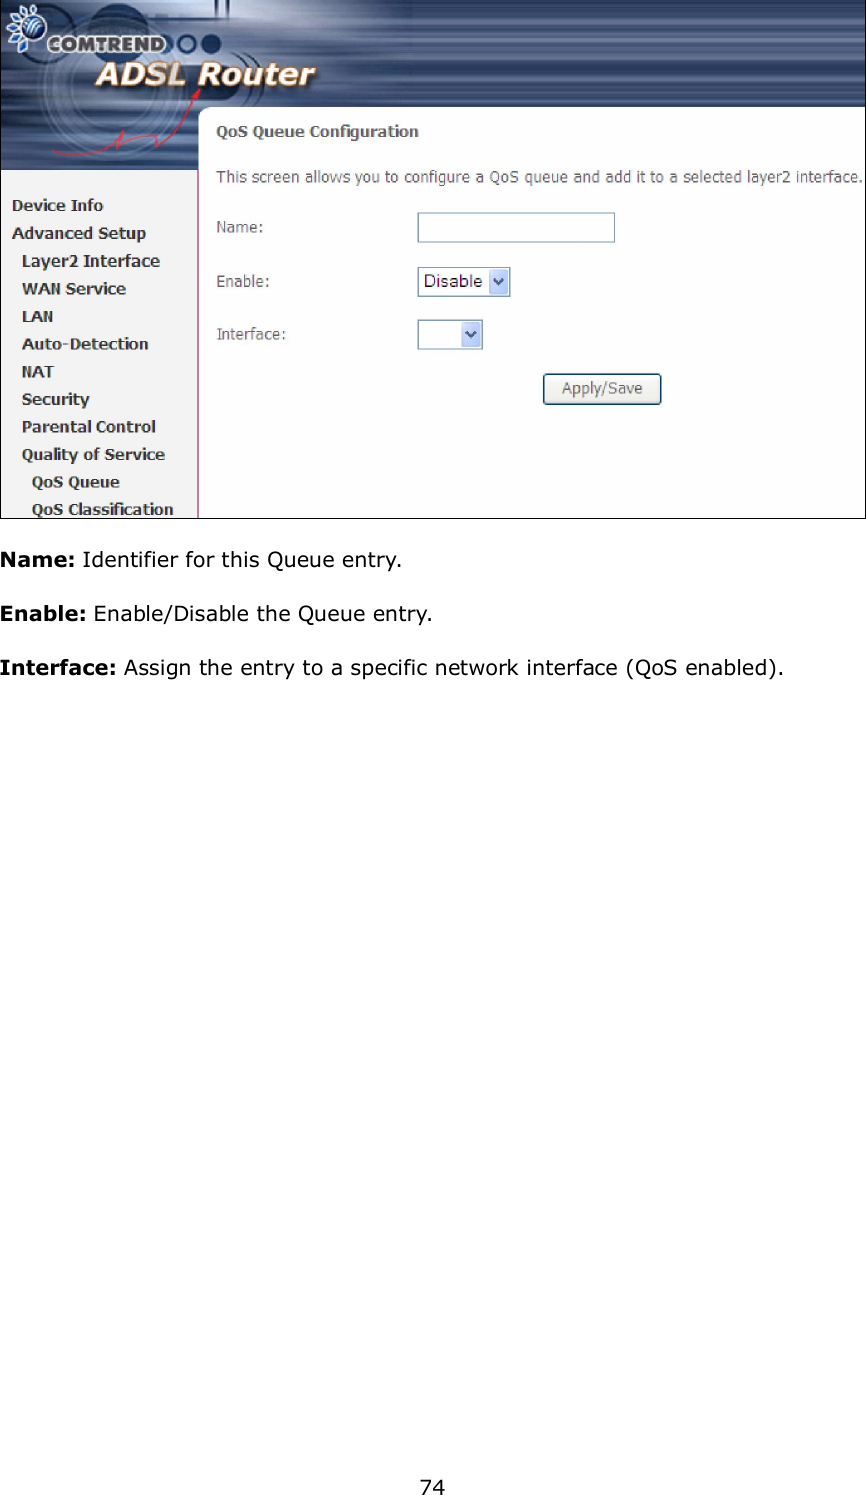  74  Name: Identifier for this Queue entry. Enable: Enable/Disable the Queue entry. Interface: Assign the entry to a specific network interface (QoS enabled). 